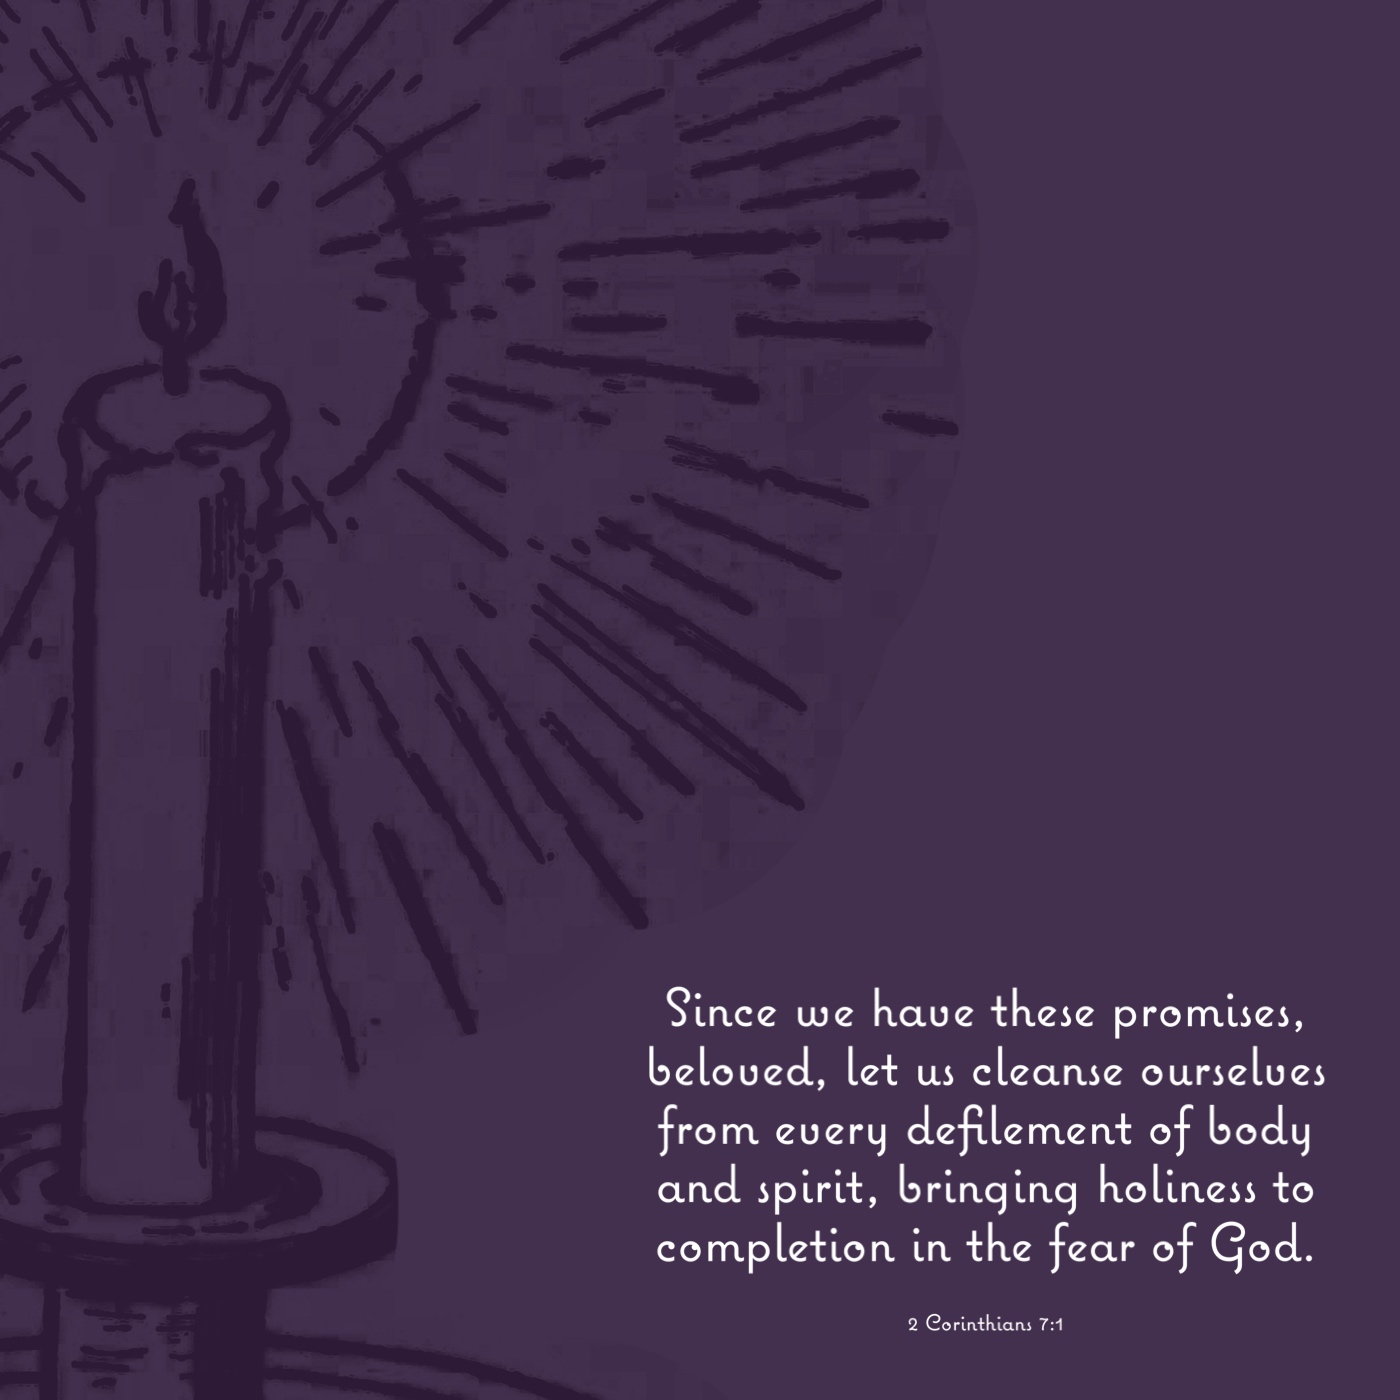 Tuesday of Advent 3 – Advent Devotions